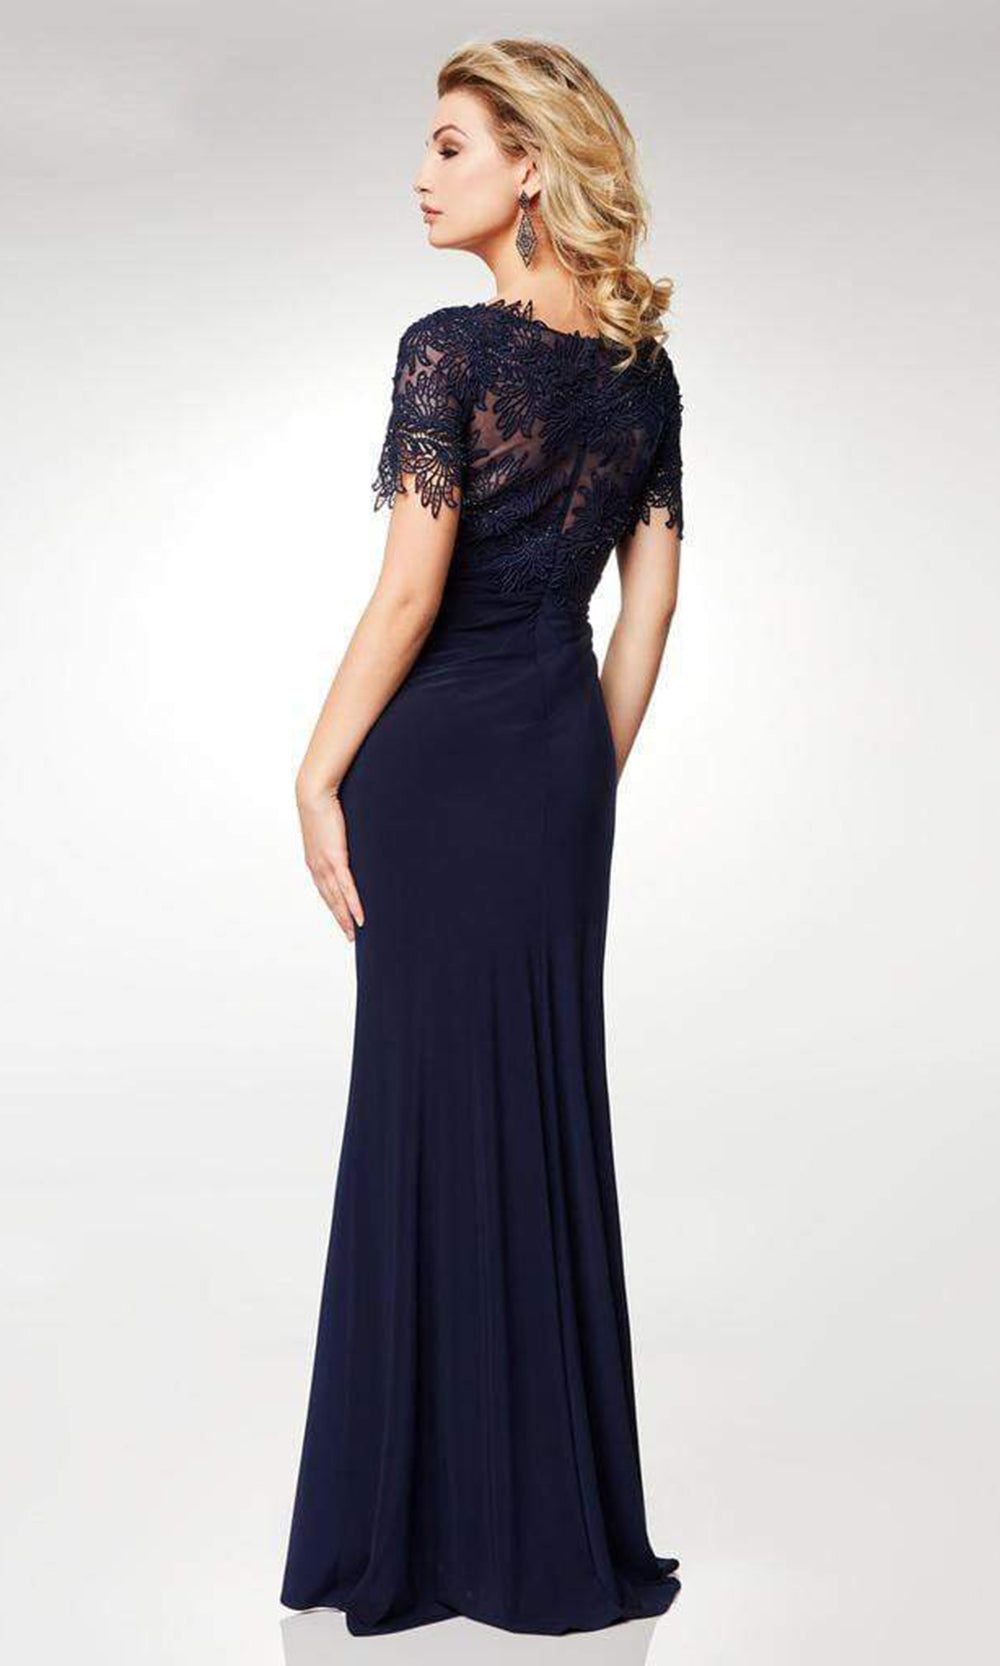 Clarisse - Short Sleeve Lace Chiffon Trumpet Dress M6517 - 1 pc Navy In Size 20 Available CCSALE 20 / Navy